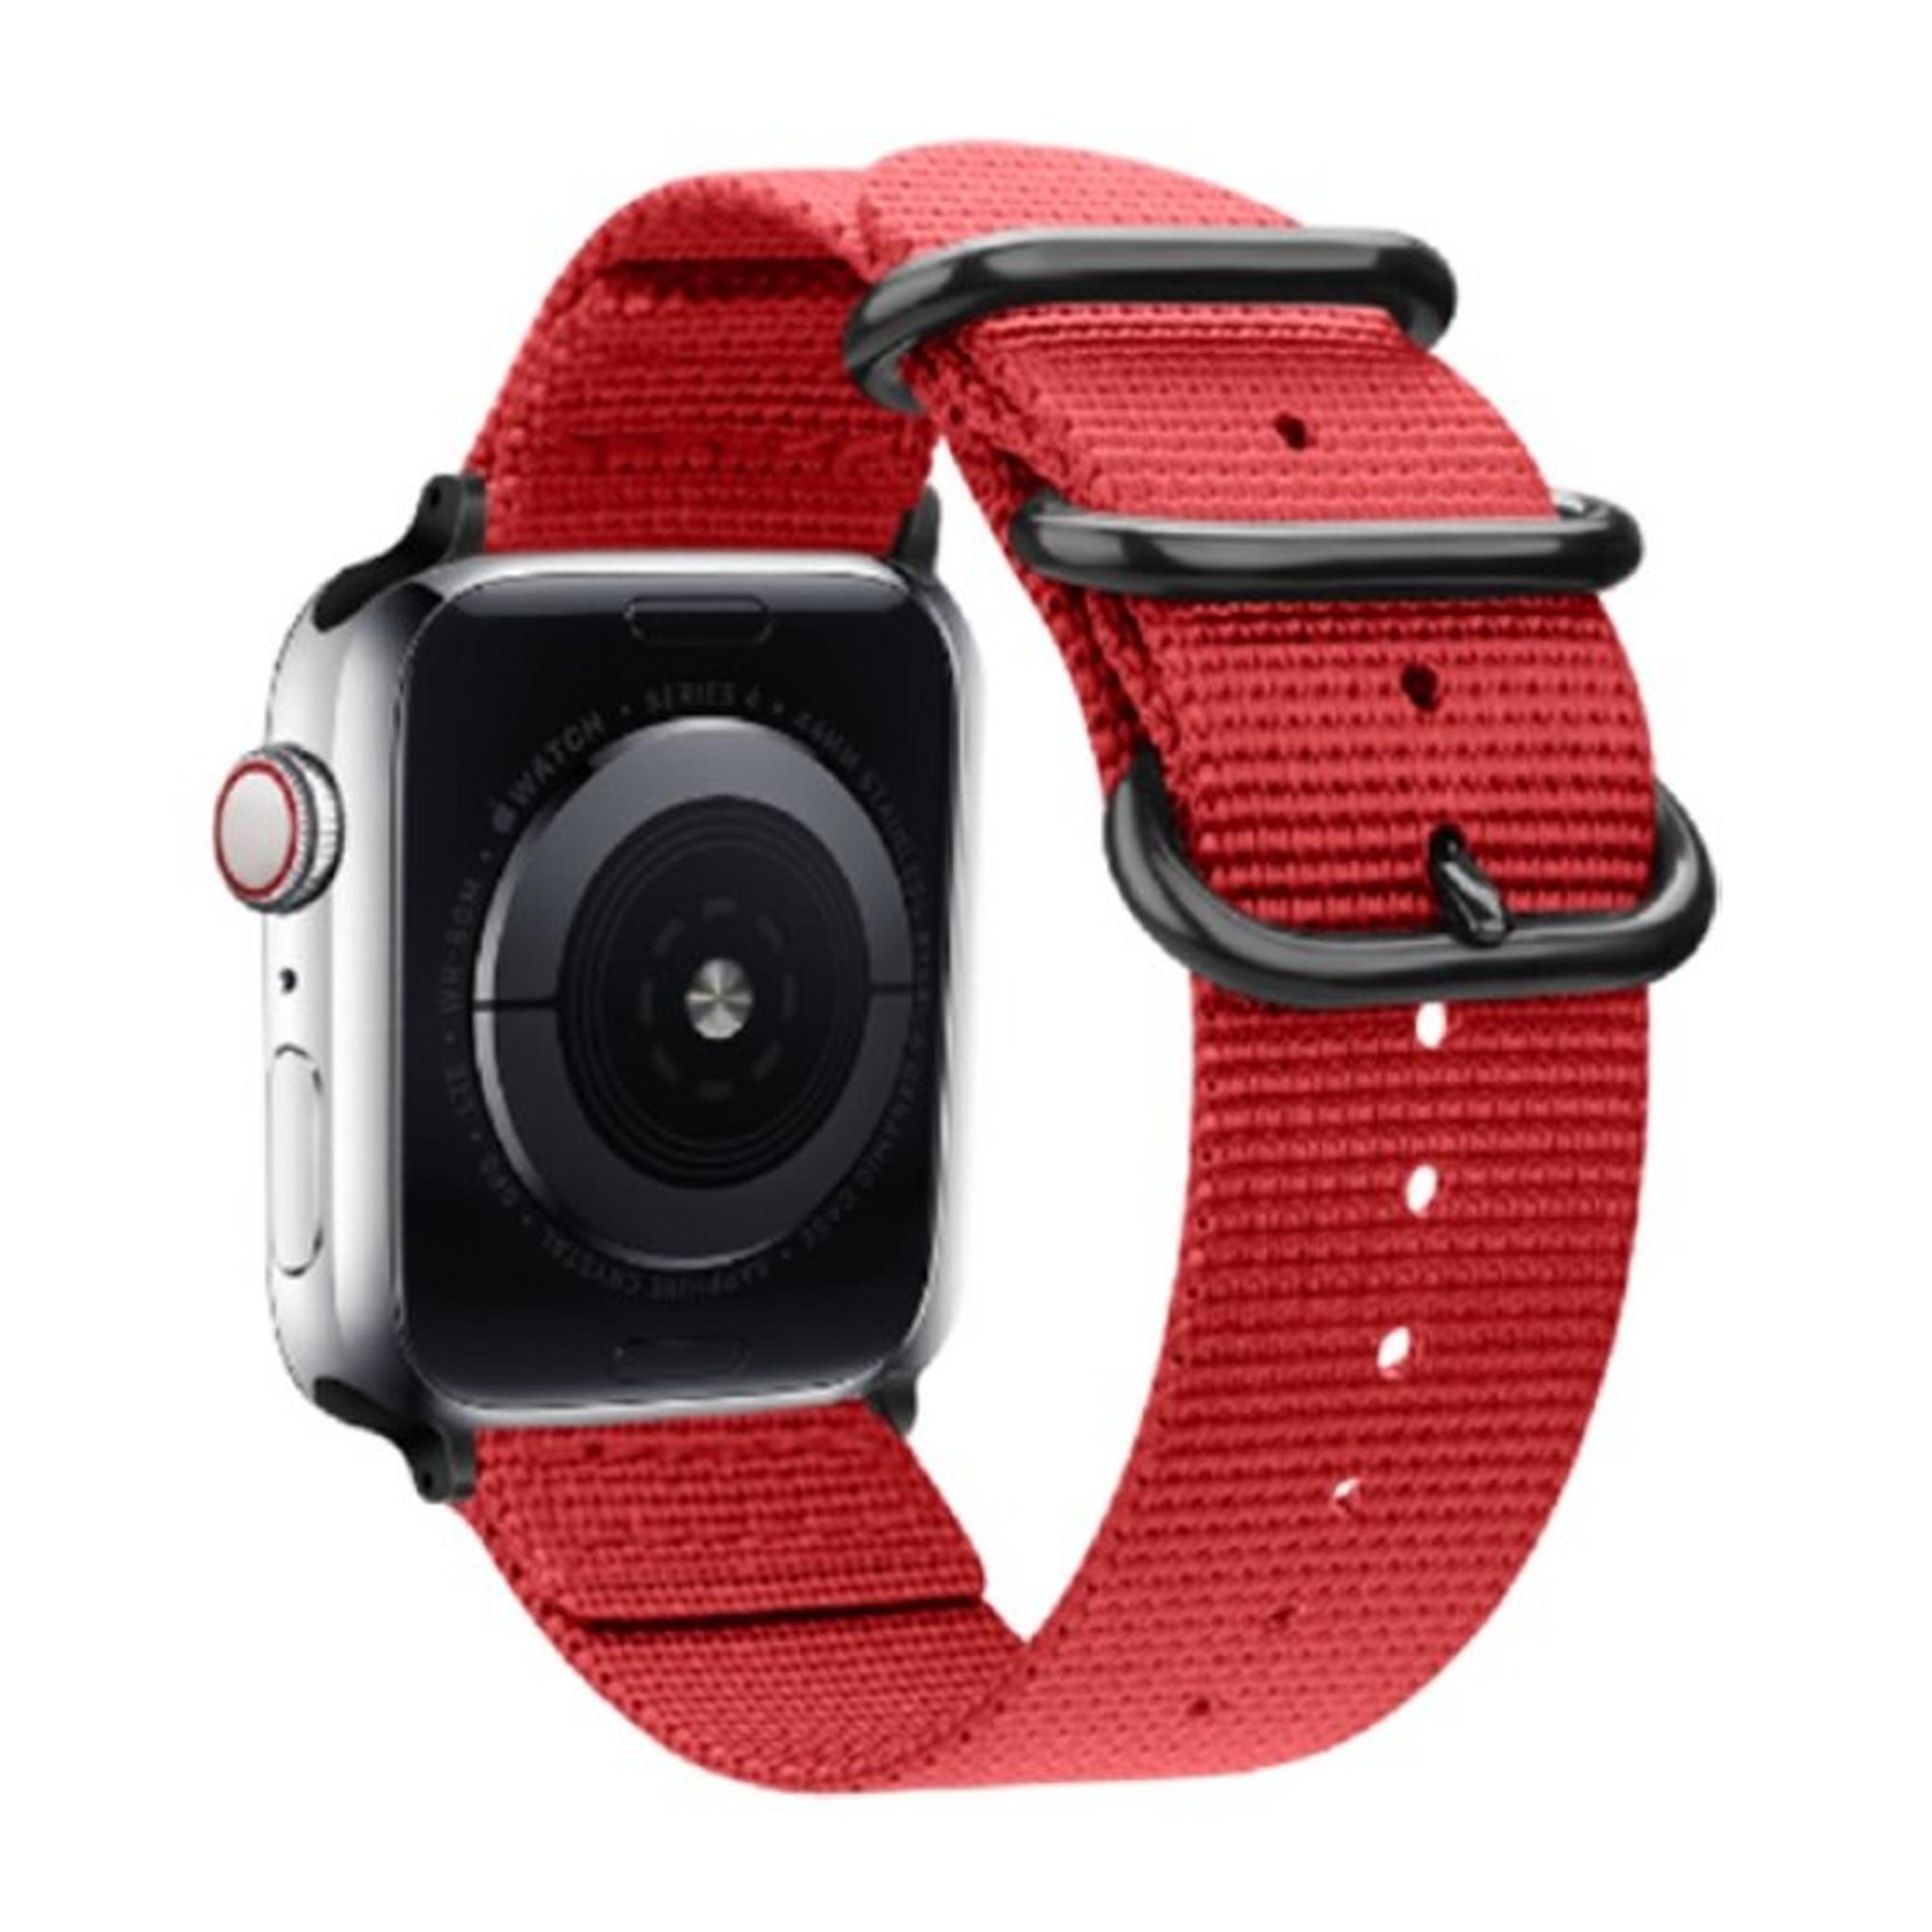 EQ Apple Watch Band Size 42/44MM (OCT1031) - Red